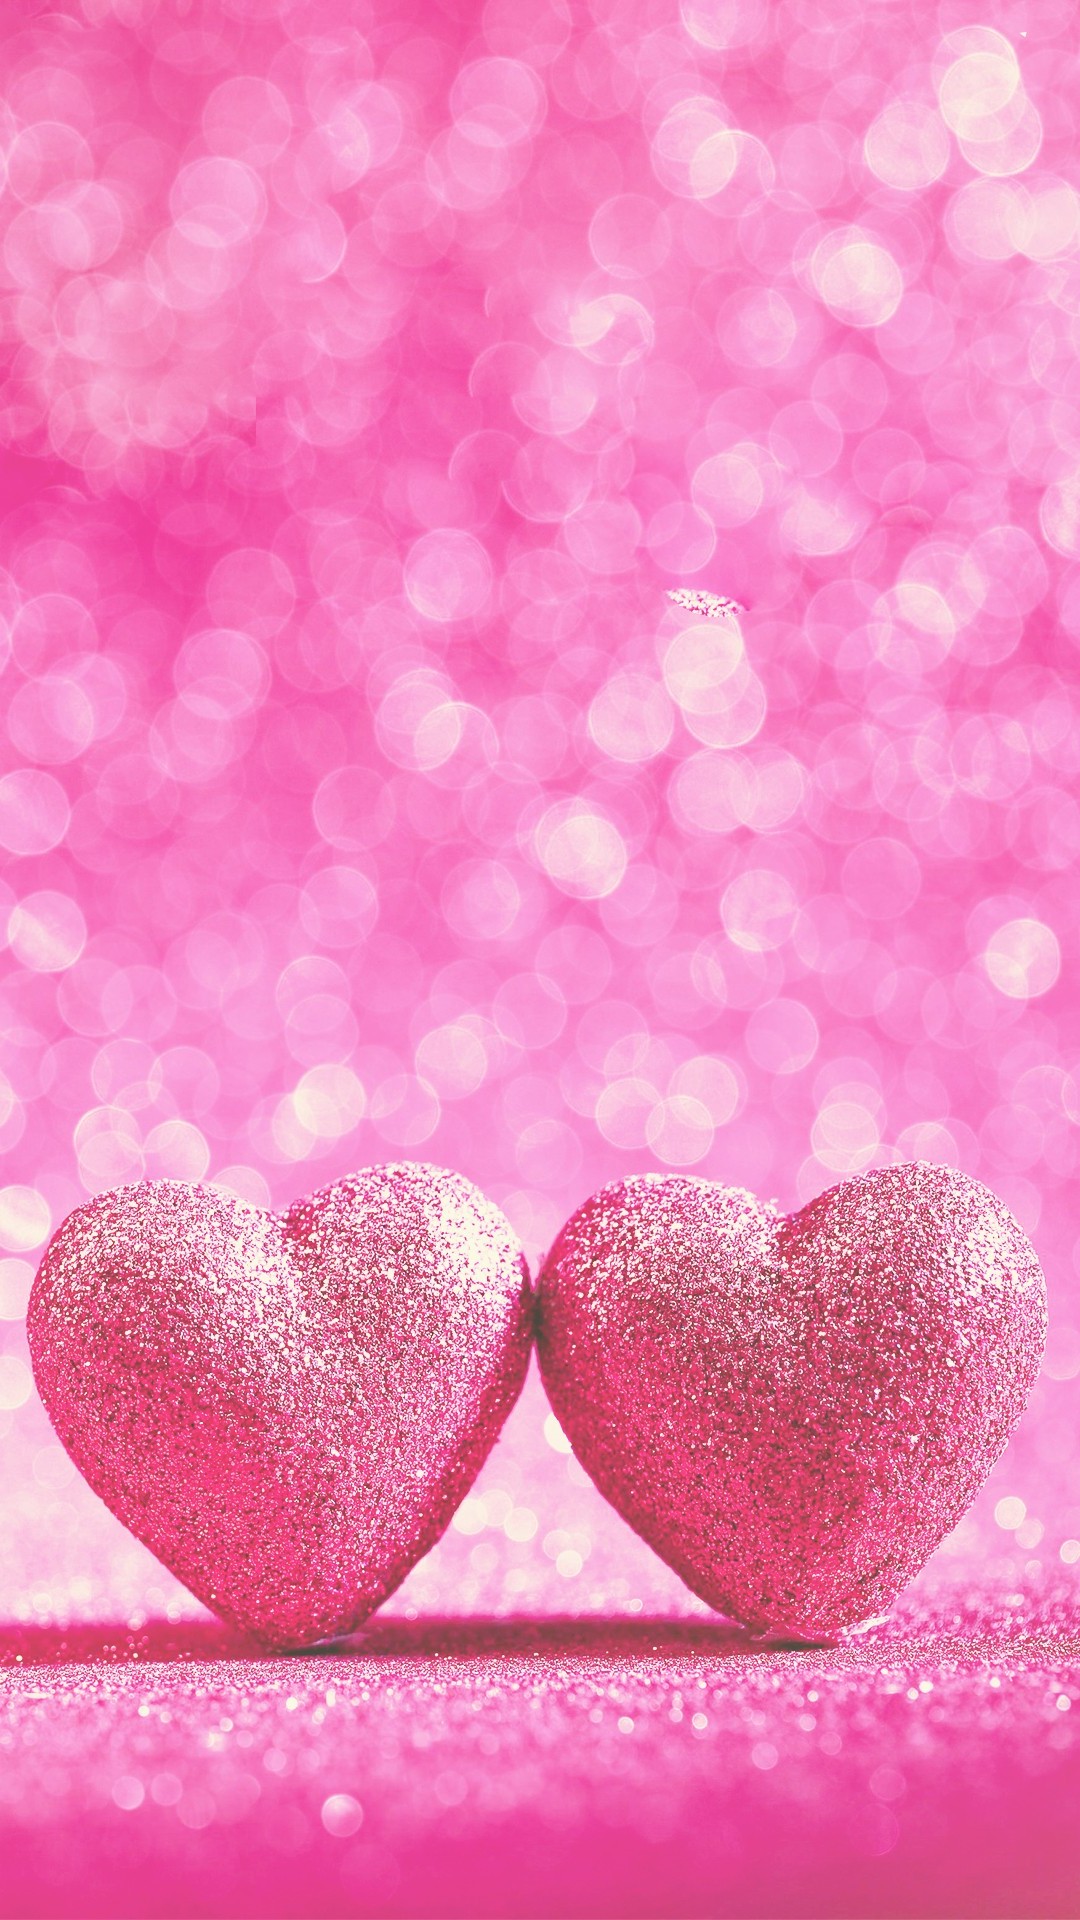 Pink Love Wallpaper Android with HD resolution 1080x1920